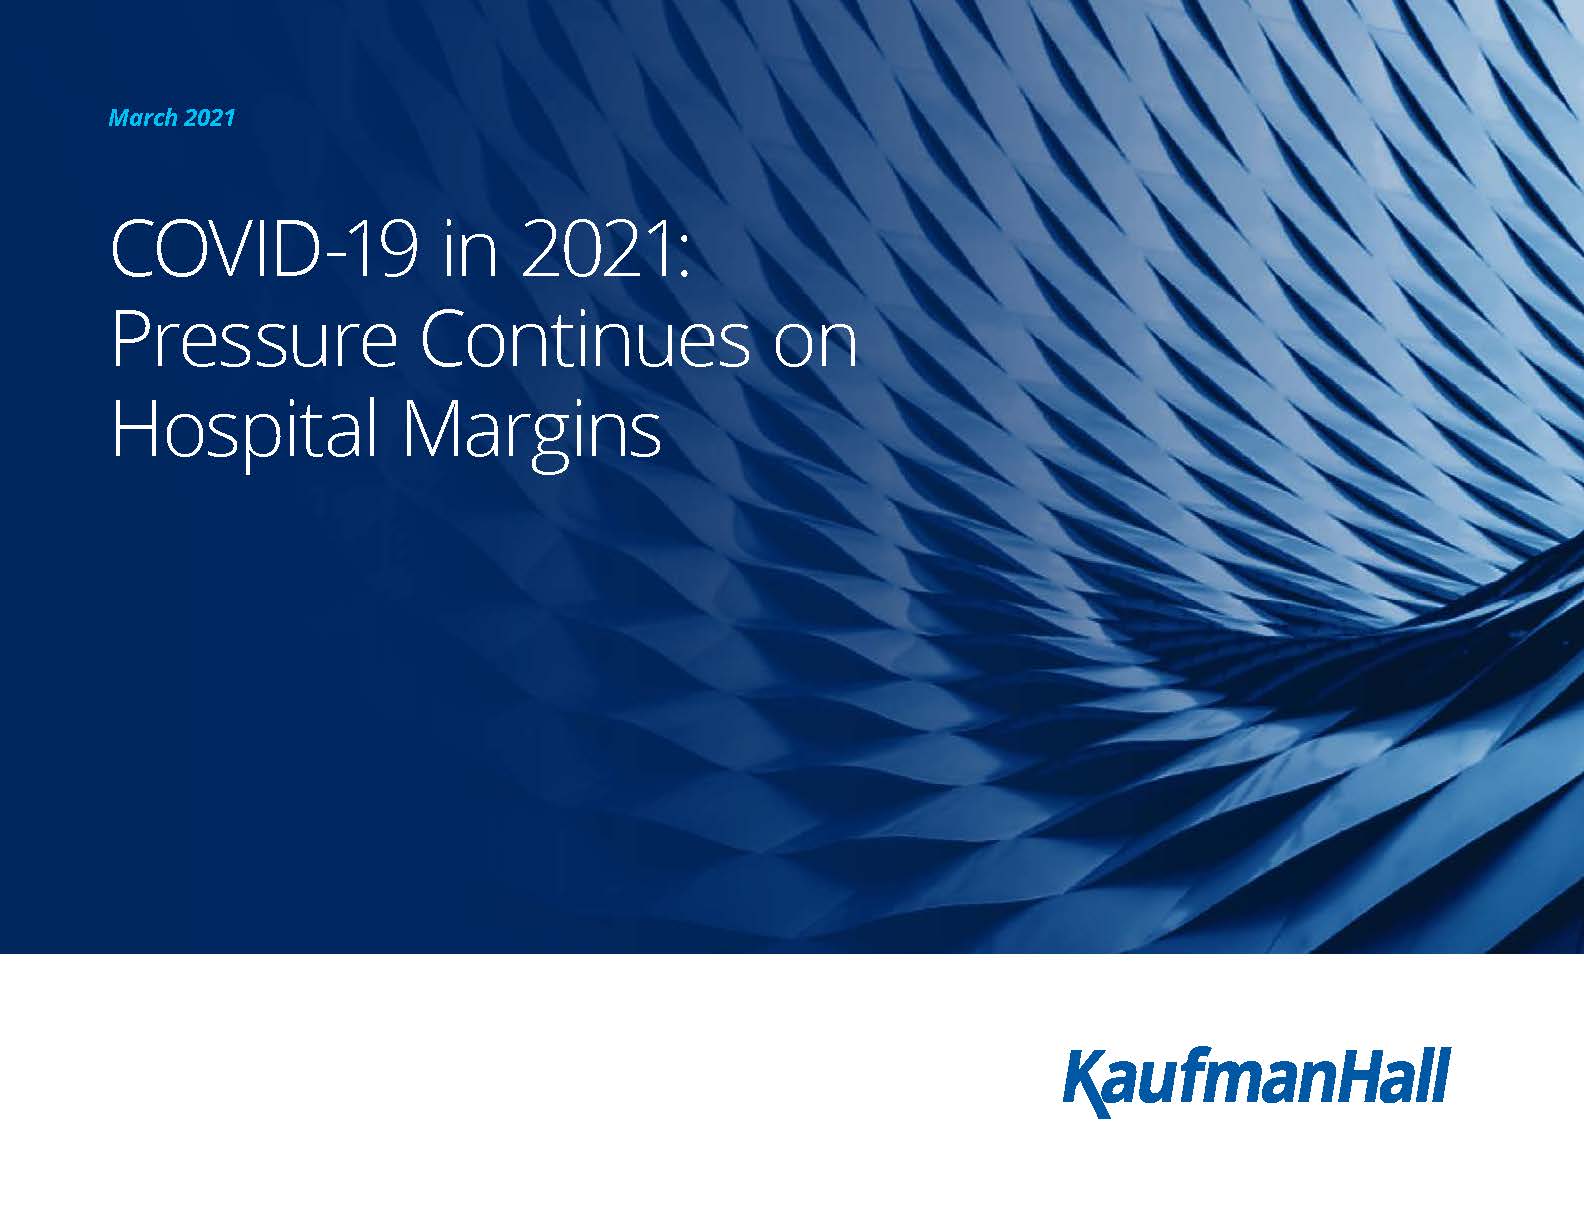 Cover of COVID-19 in 2021: Pressure Continues on Hospital Margins Report. March 2021. KaufmanHall.